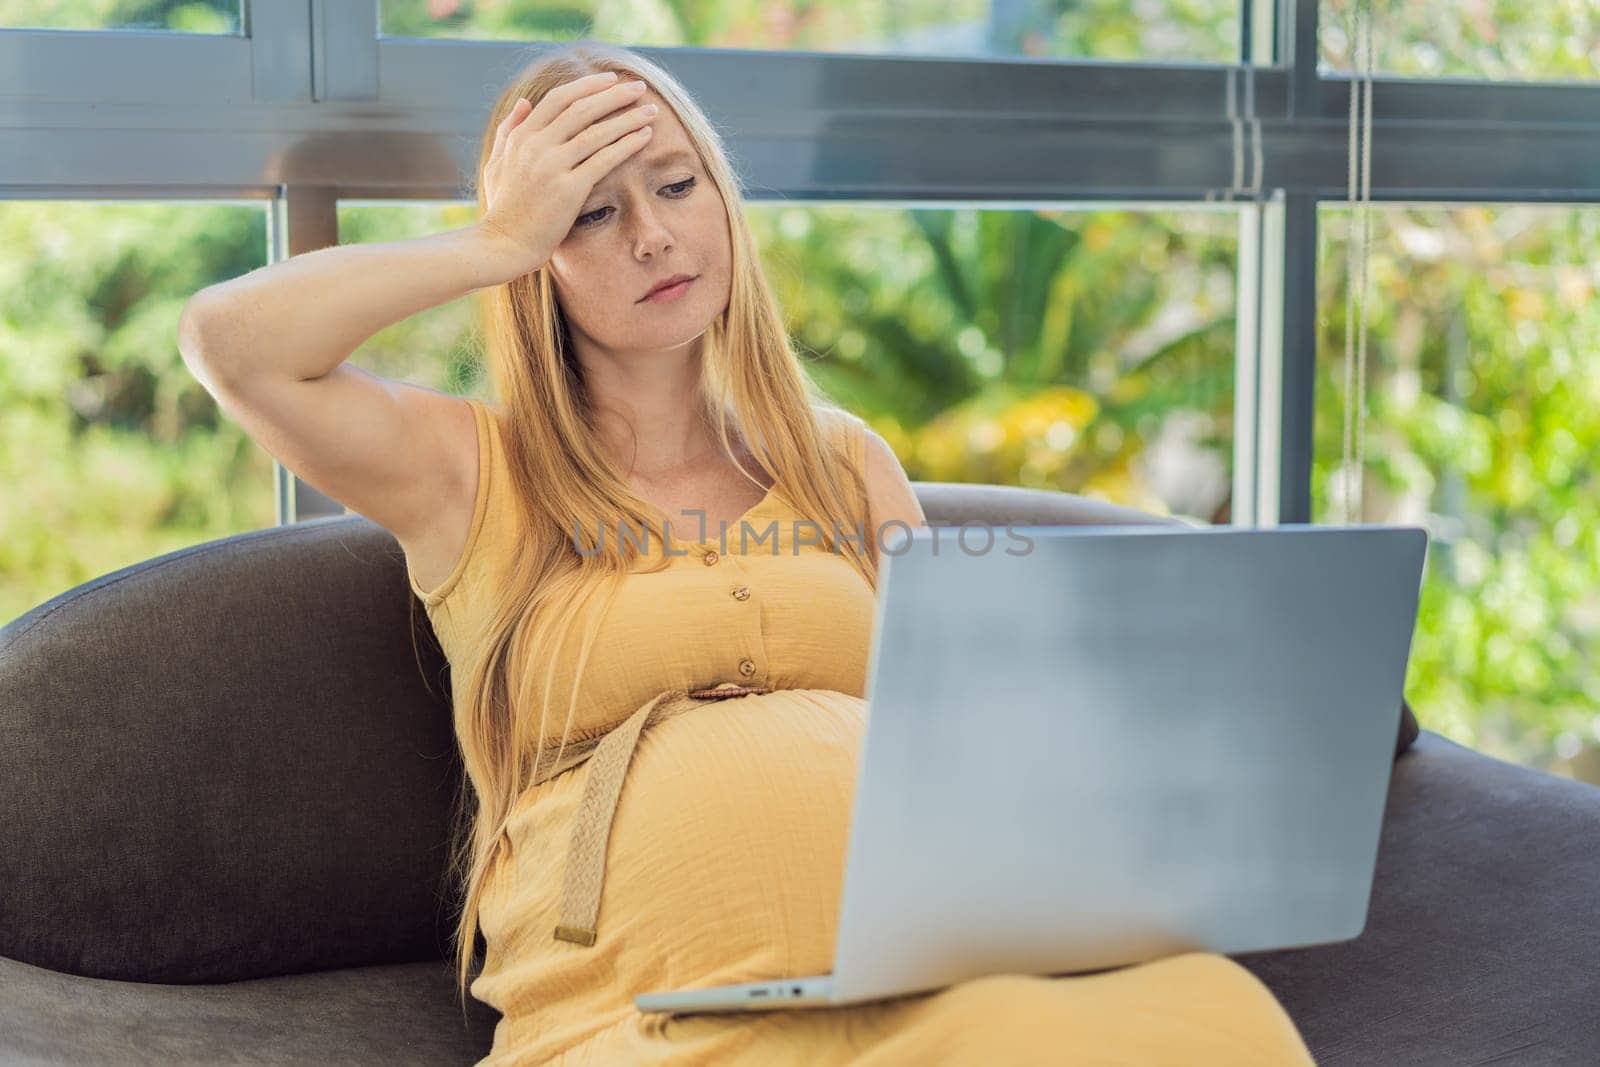 Weary pregnant woman, tired of working from home, navigates the challenges of balancing professional tasks with pregnancy demands by galitskaya